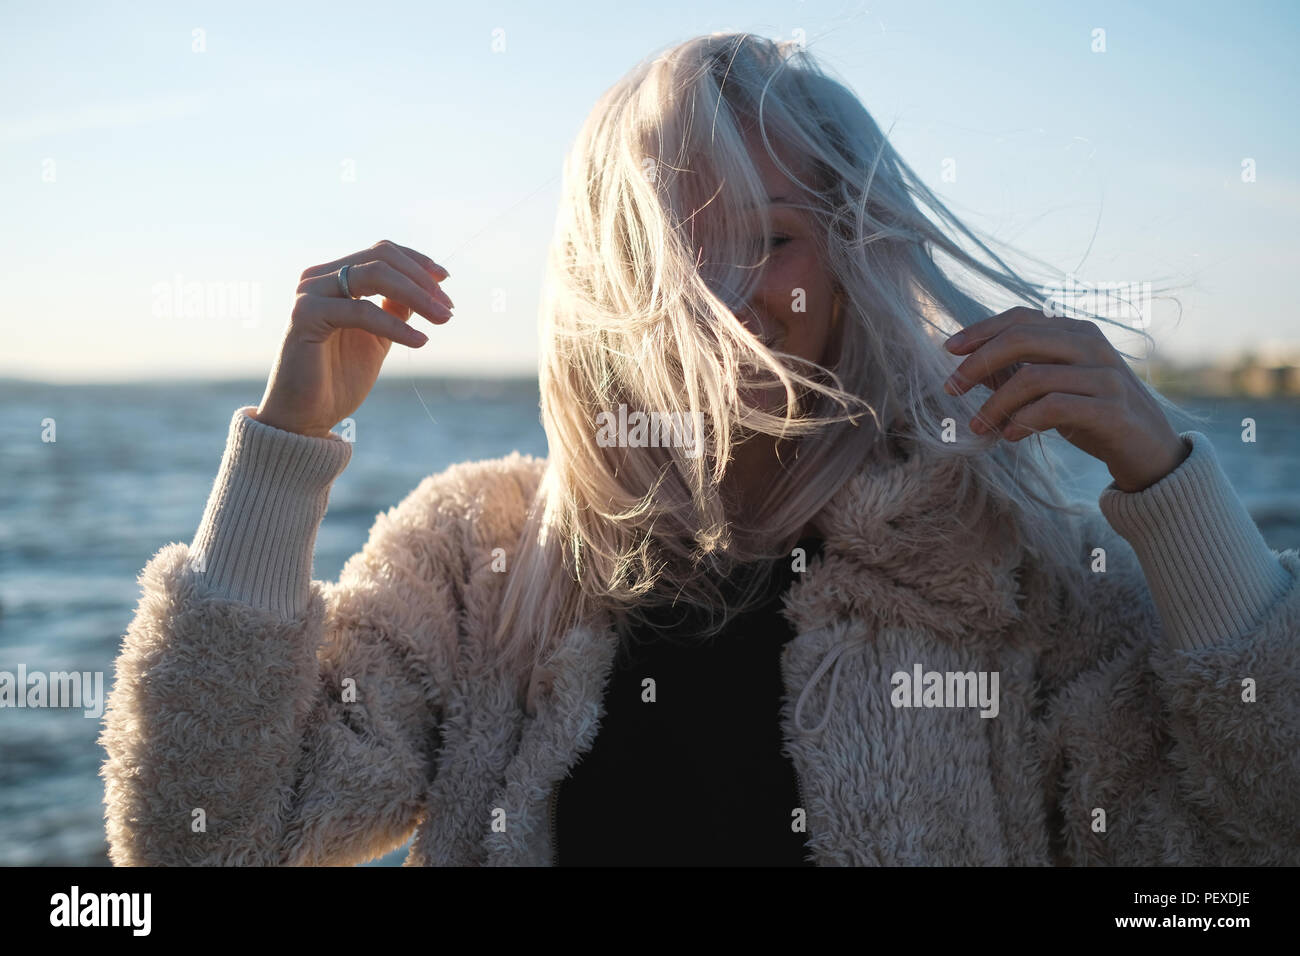 Lifestyle portrait of young blonde woman in windy day at sea Stock Photo